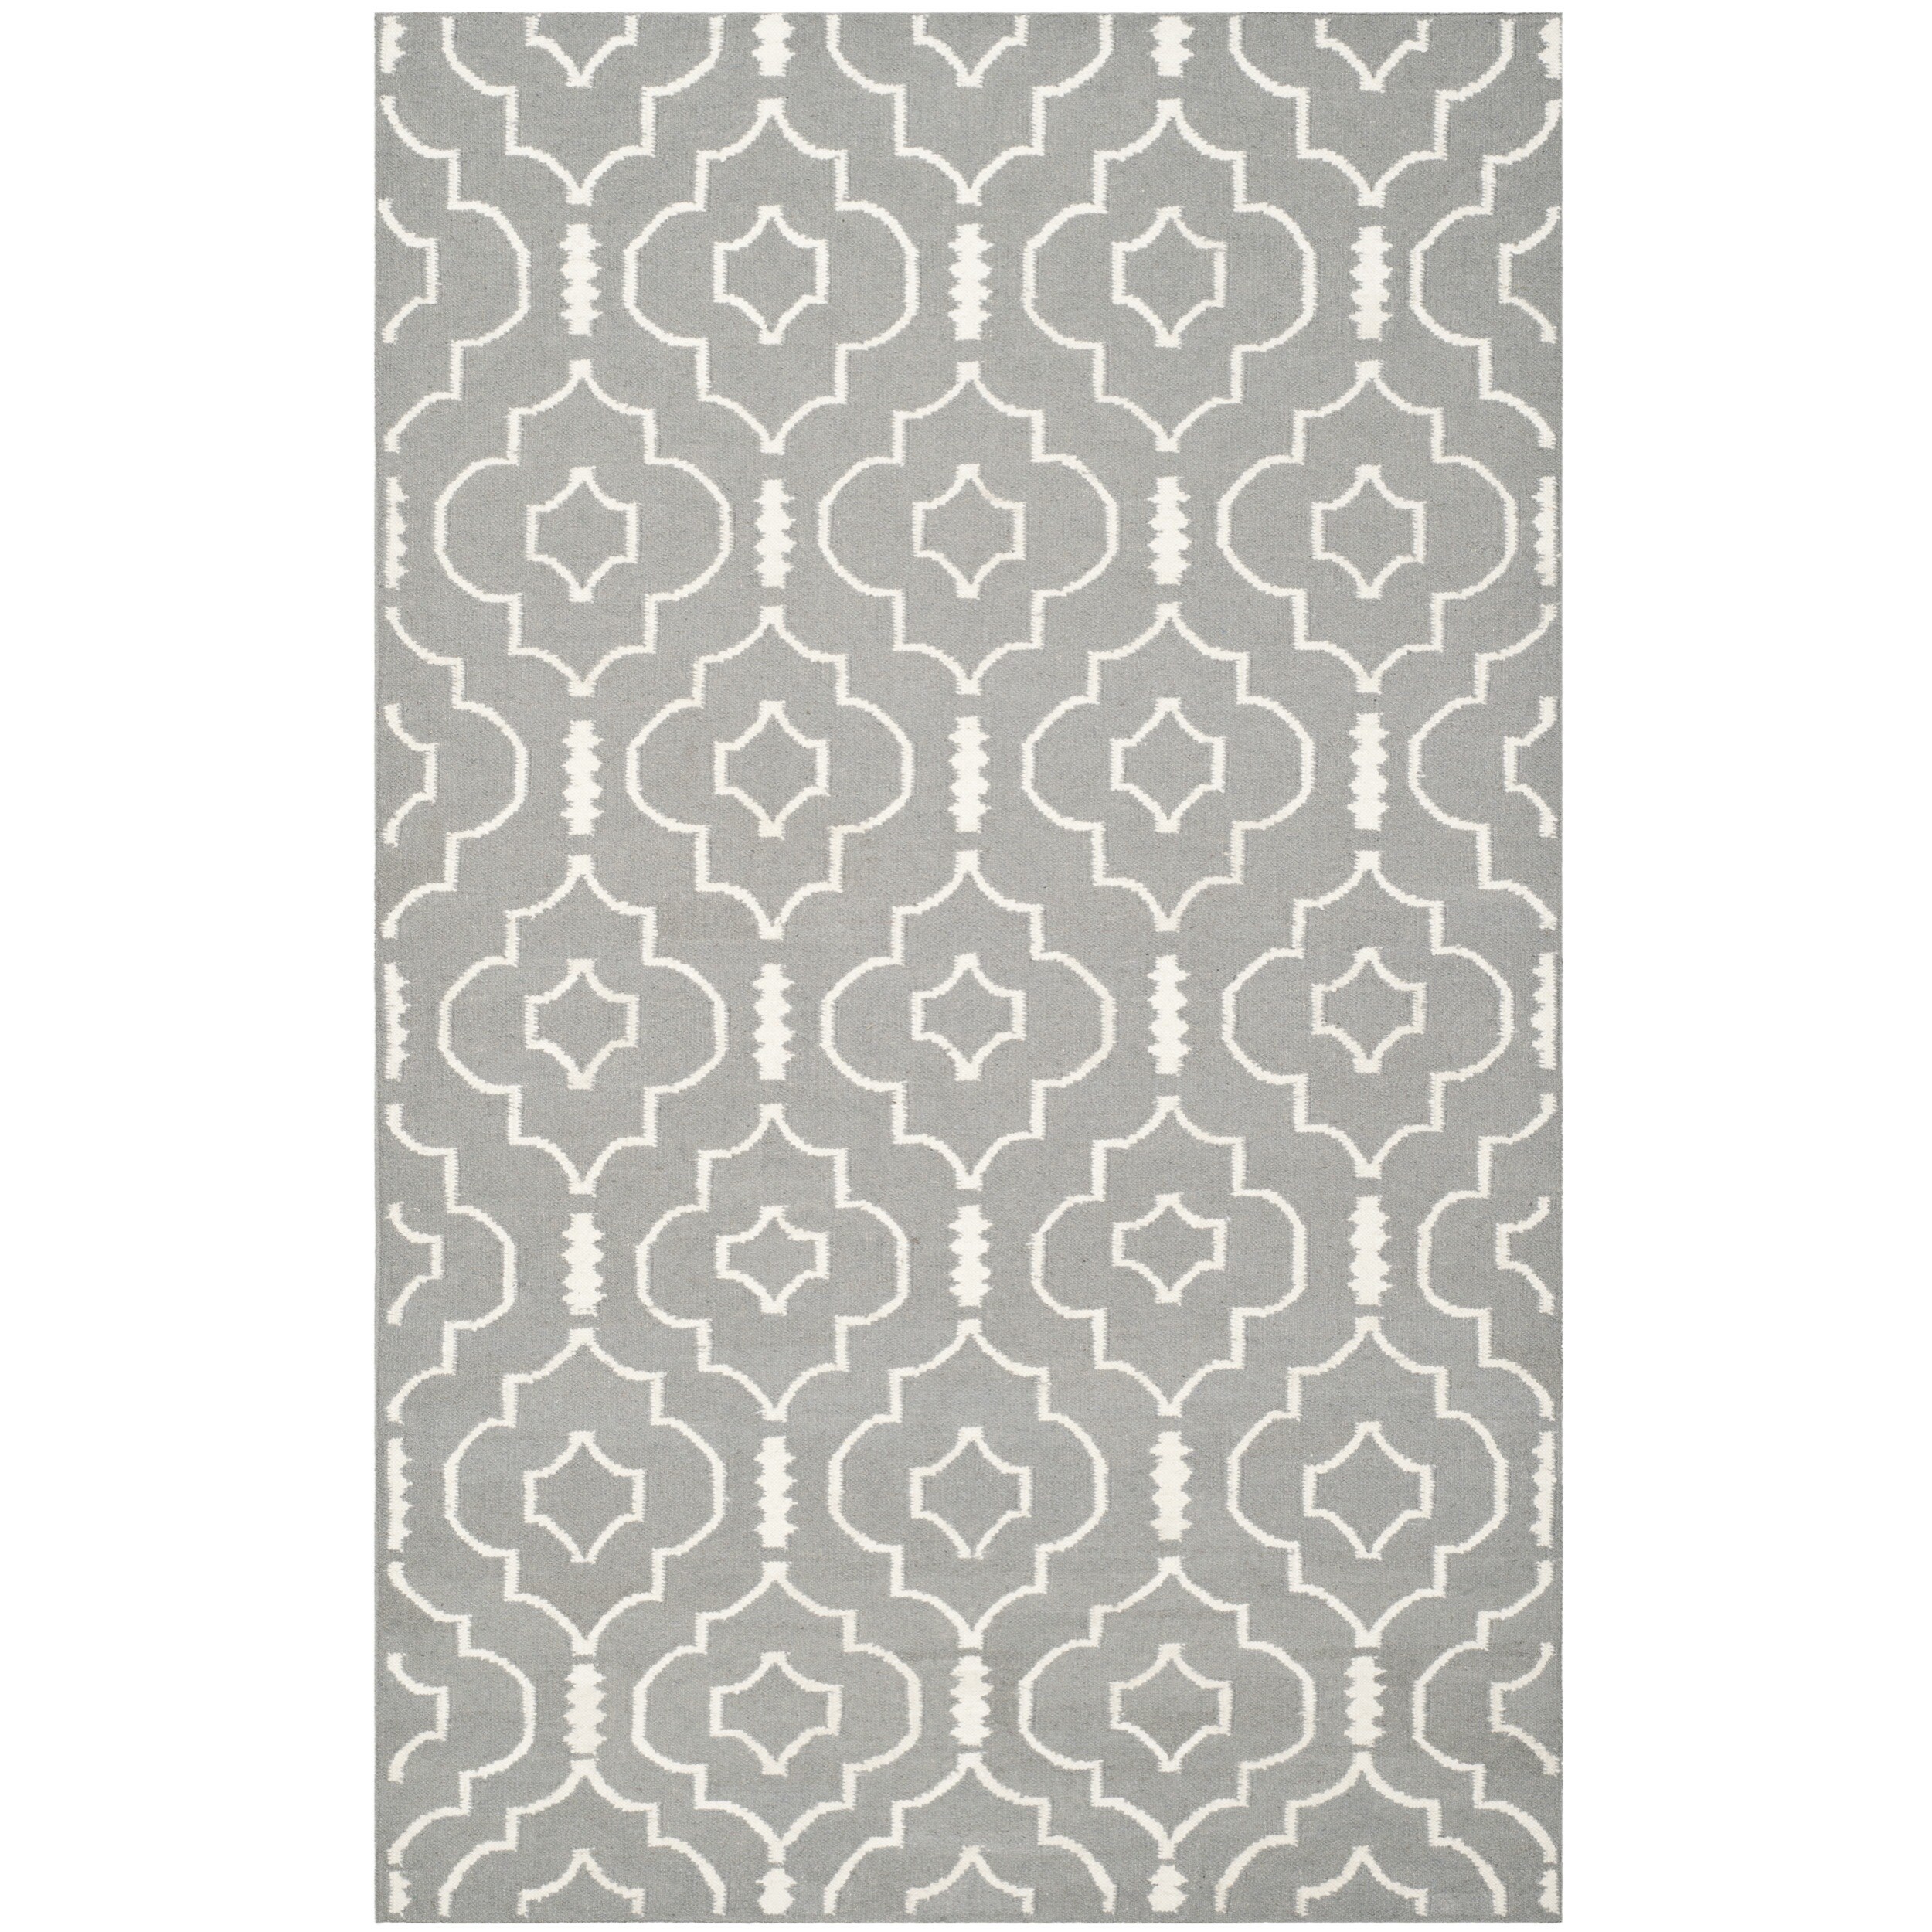 Safavieh Handwoven Moroccan Dhurrie Gray/ Ivory Wool Rug With .25 inch Pile (5 X 8)